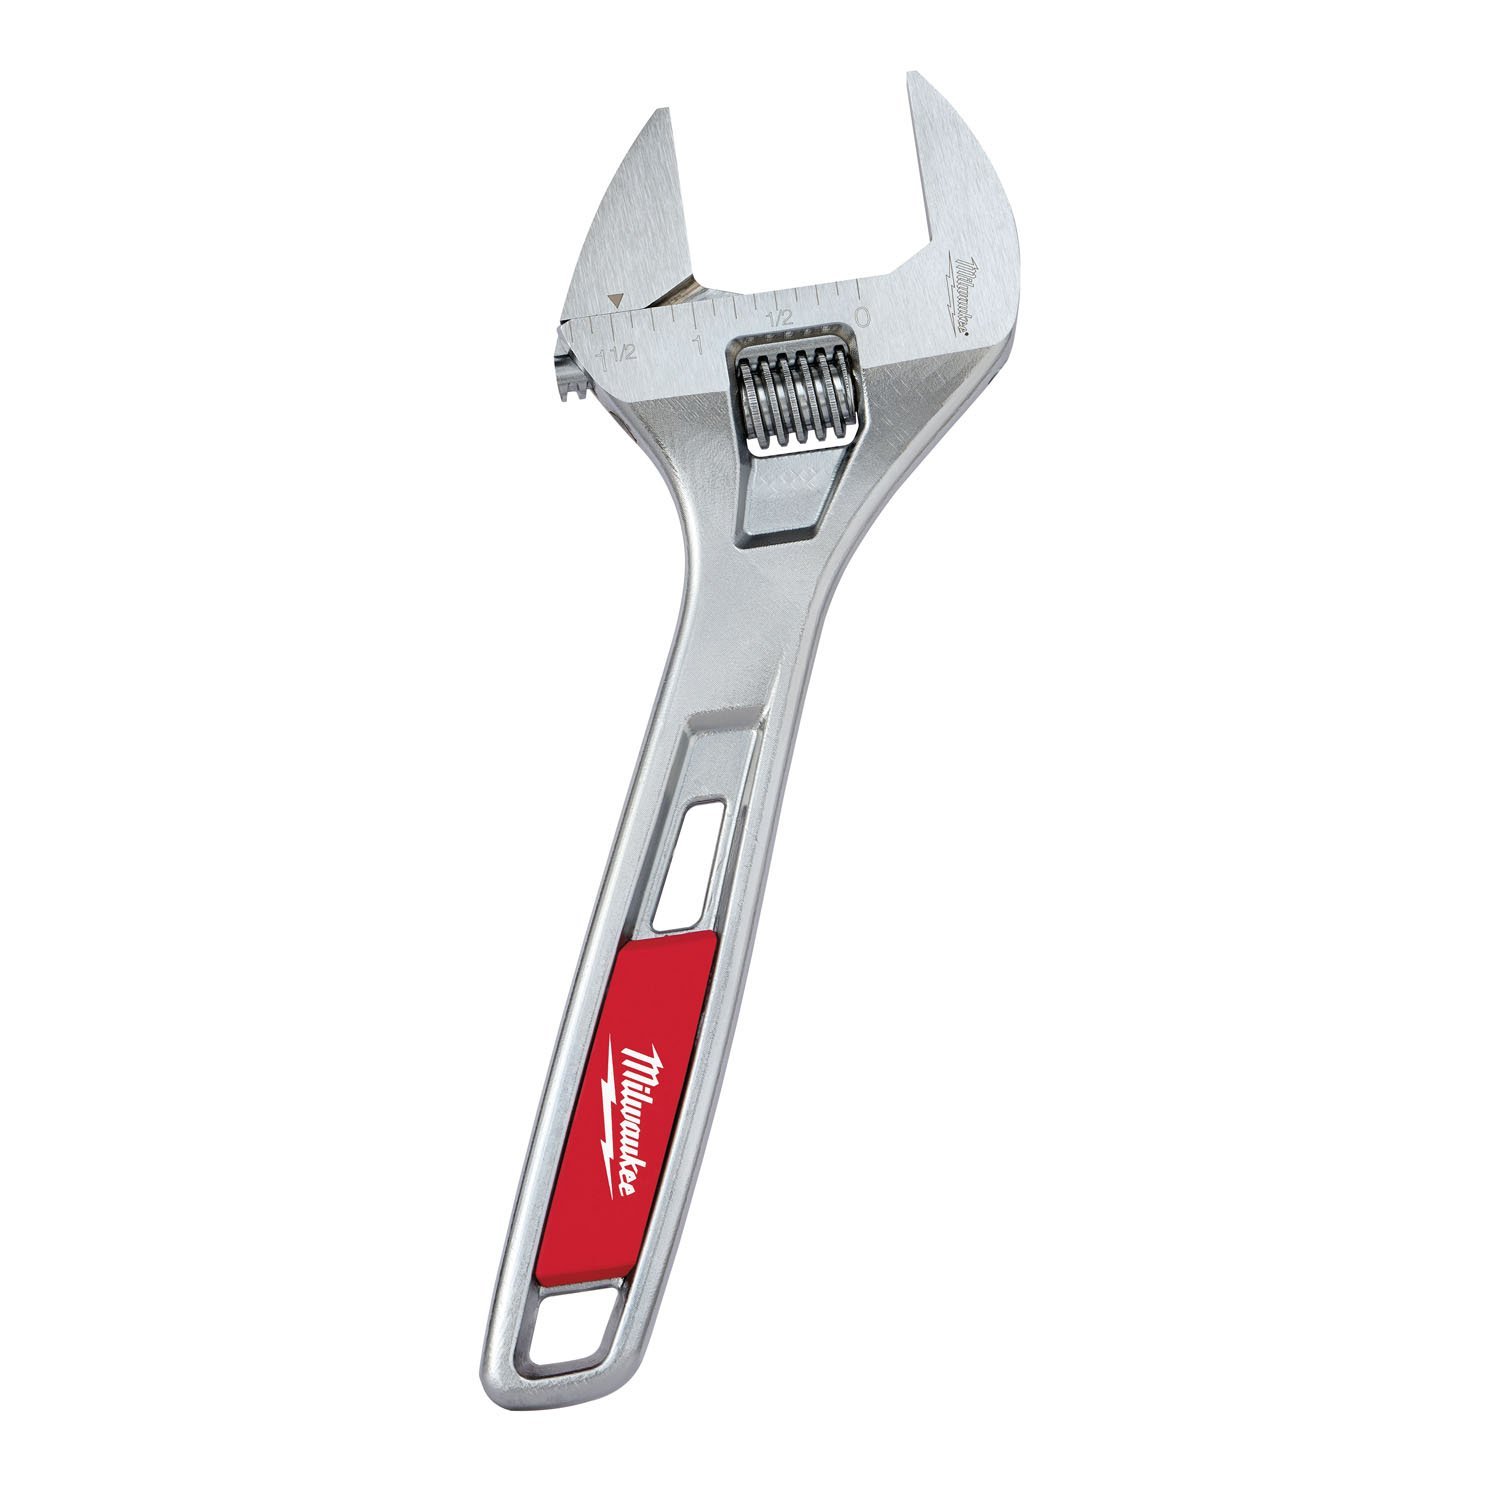 UNINSULATED WIDE JAW ADJUSTABLE WRENCH 8 IN WRENCH OPENING 11.41 IN L